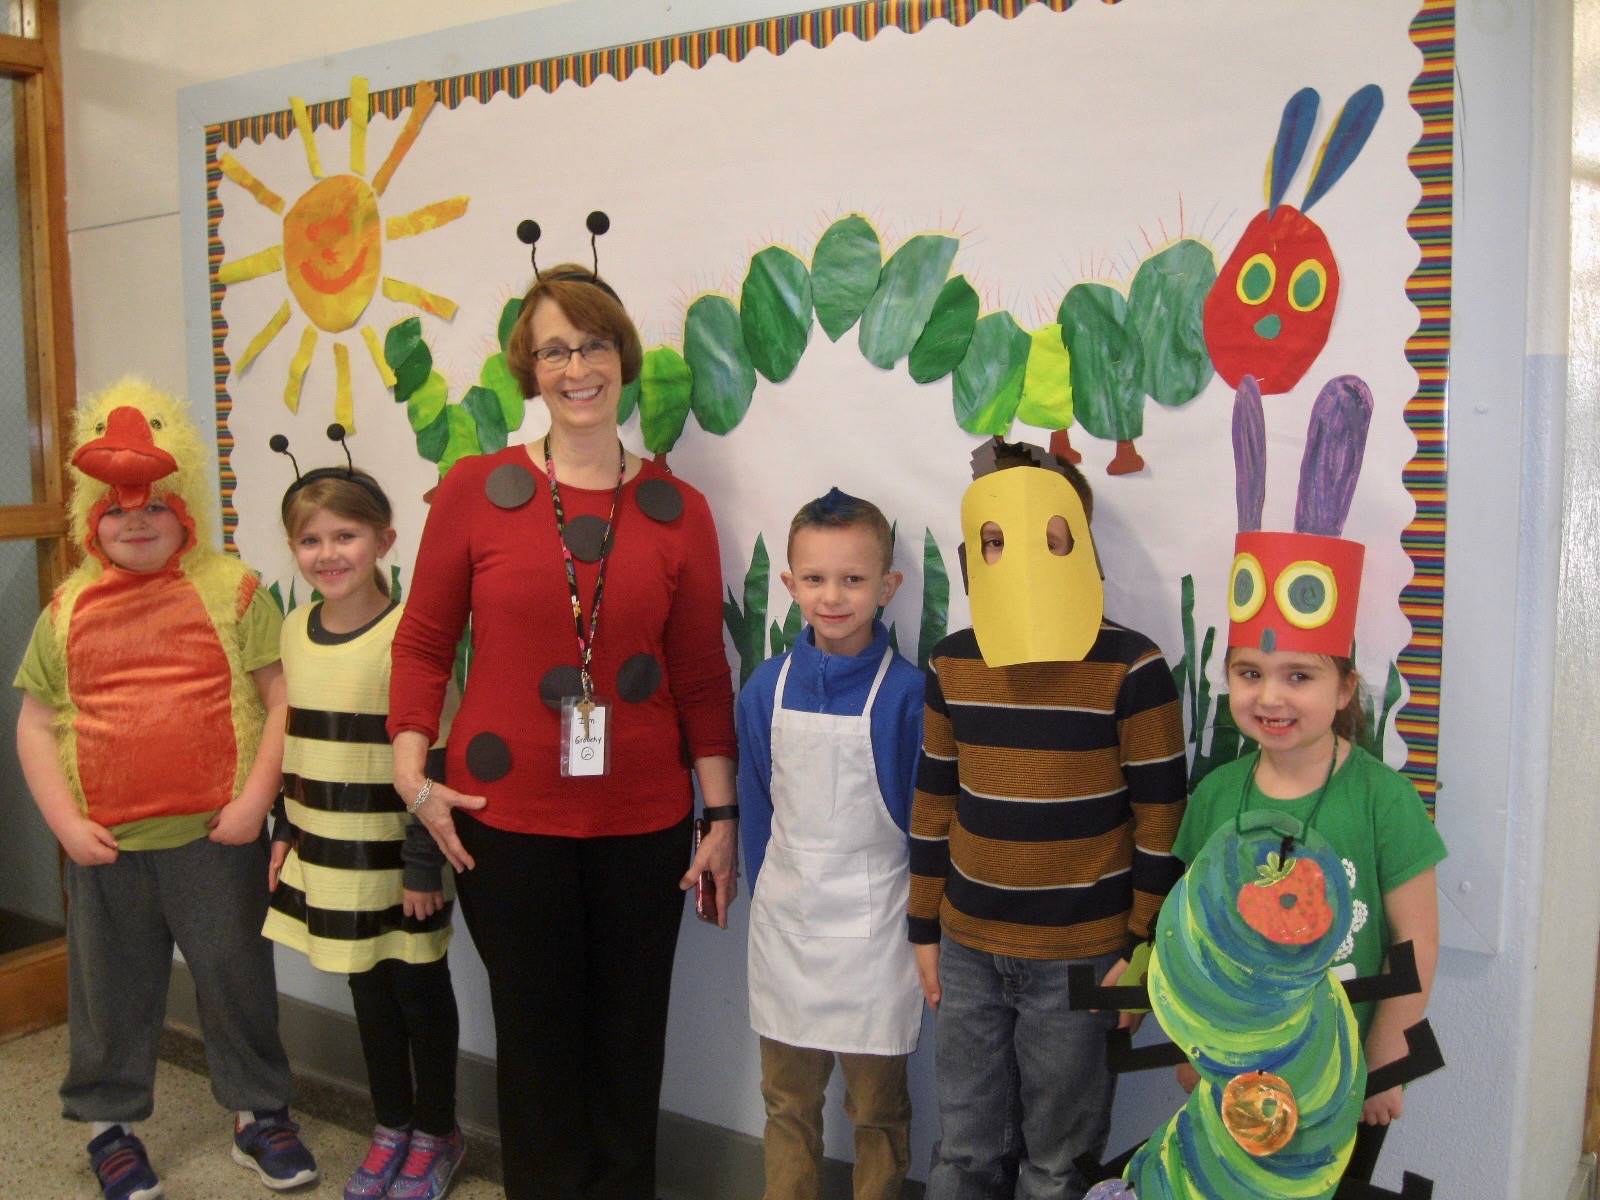 A teacher and 5 students dressed like favorite animals.